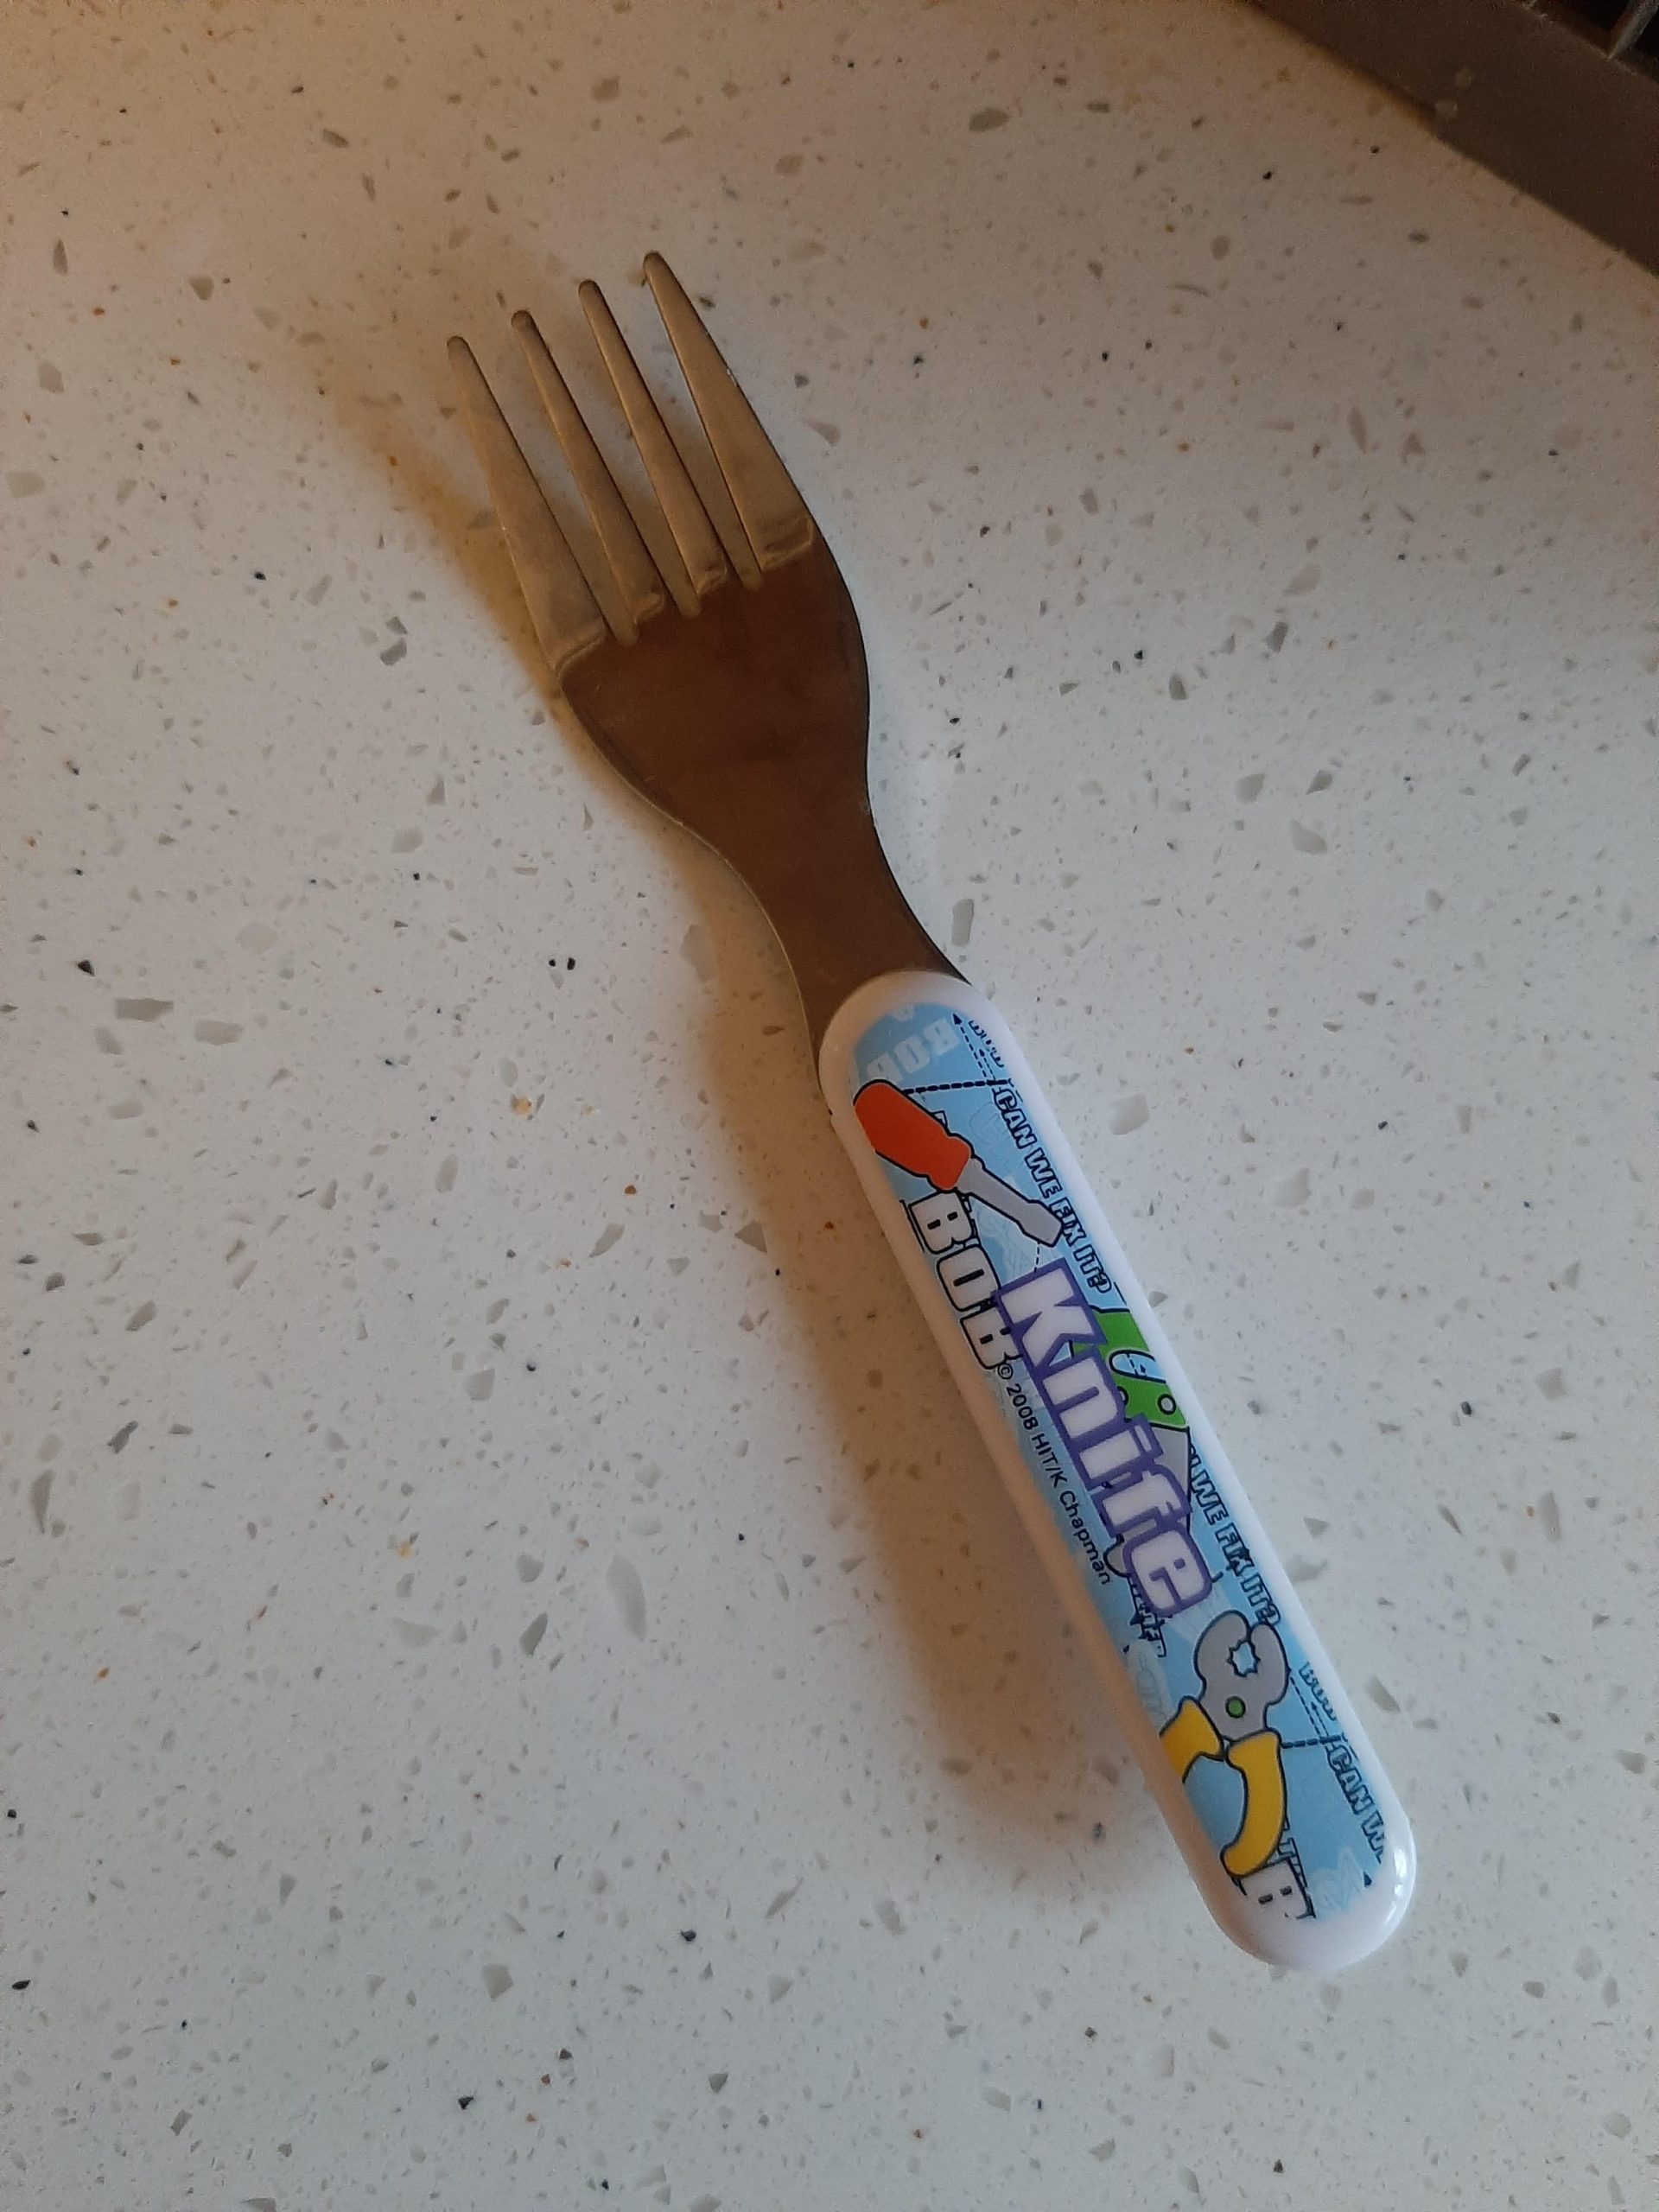 Bob The Builder's Knife – The Cutlery Review